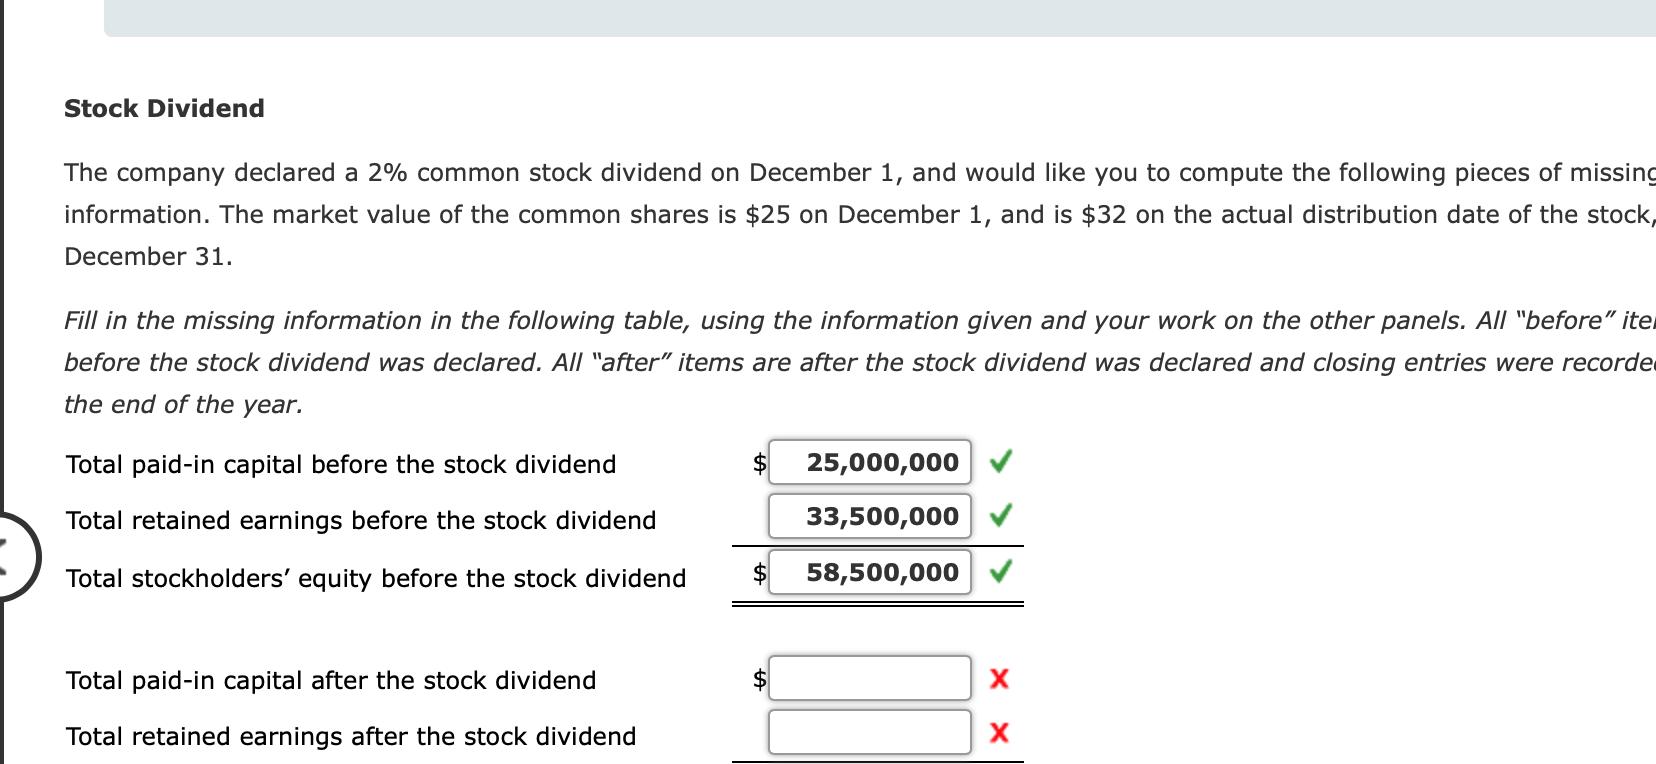 Stock Dividend The company declared a 2% common stock dividend on December 1, and would like you to compute the following pie